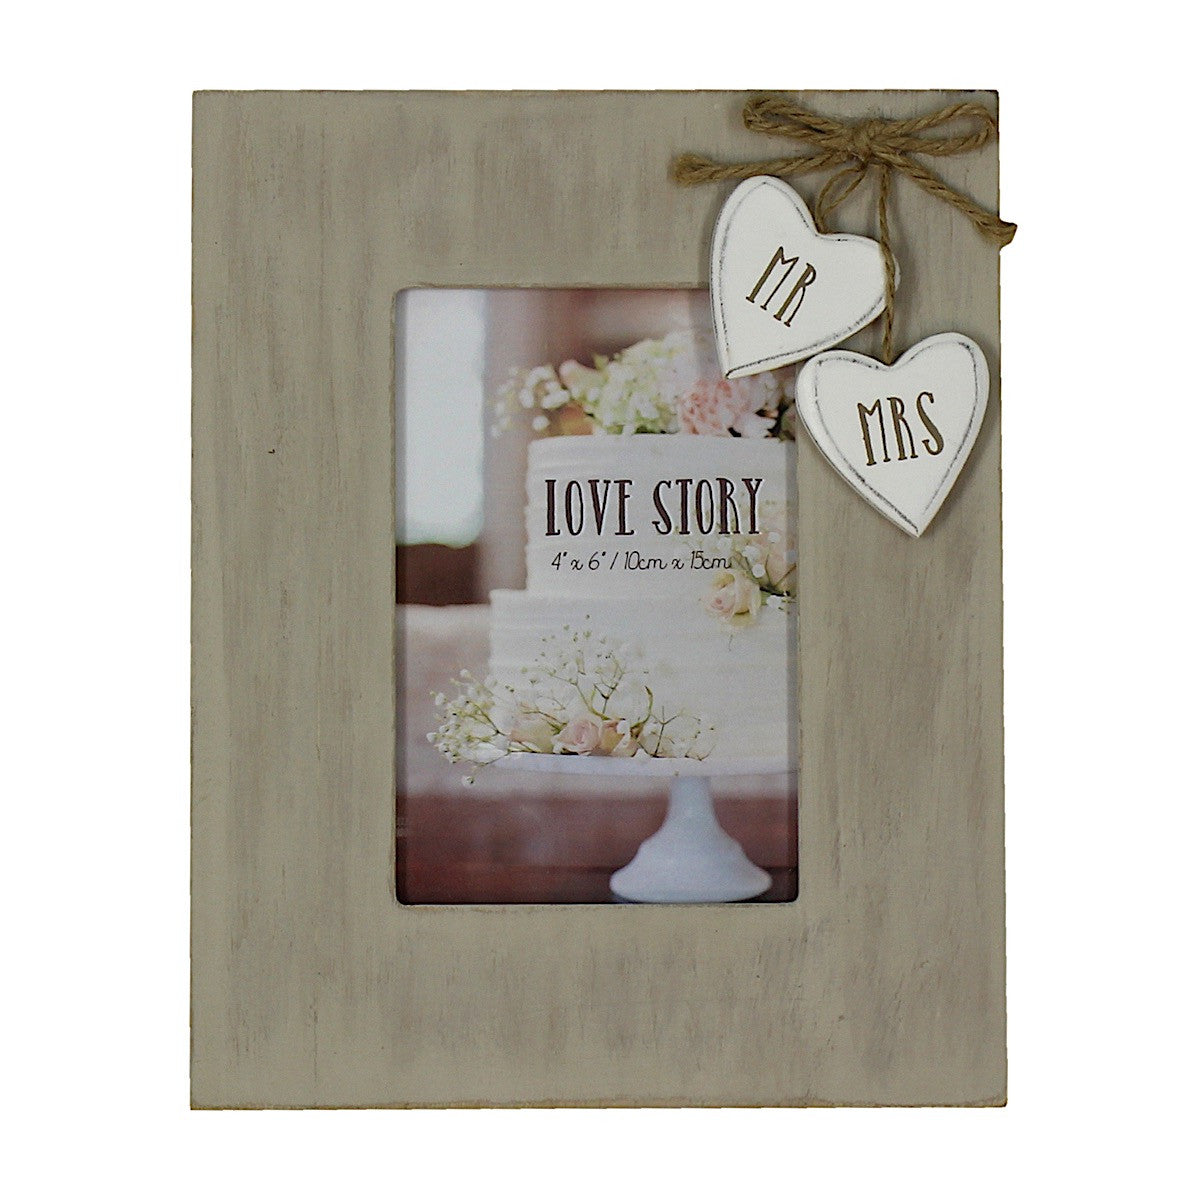 Love Story 'Mr and Mrs' Photo Frame | More Than Just at Gift | Narborough Hall